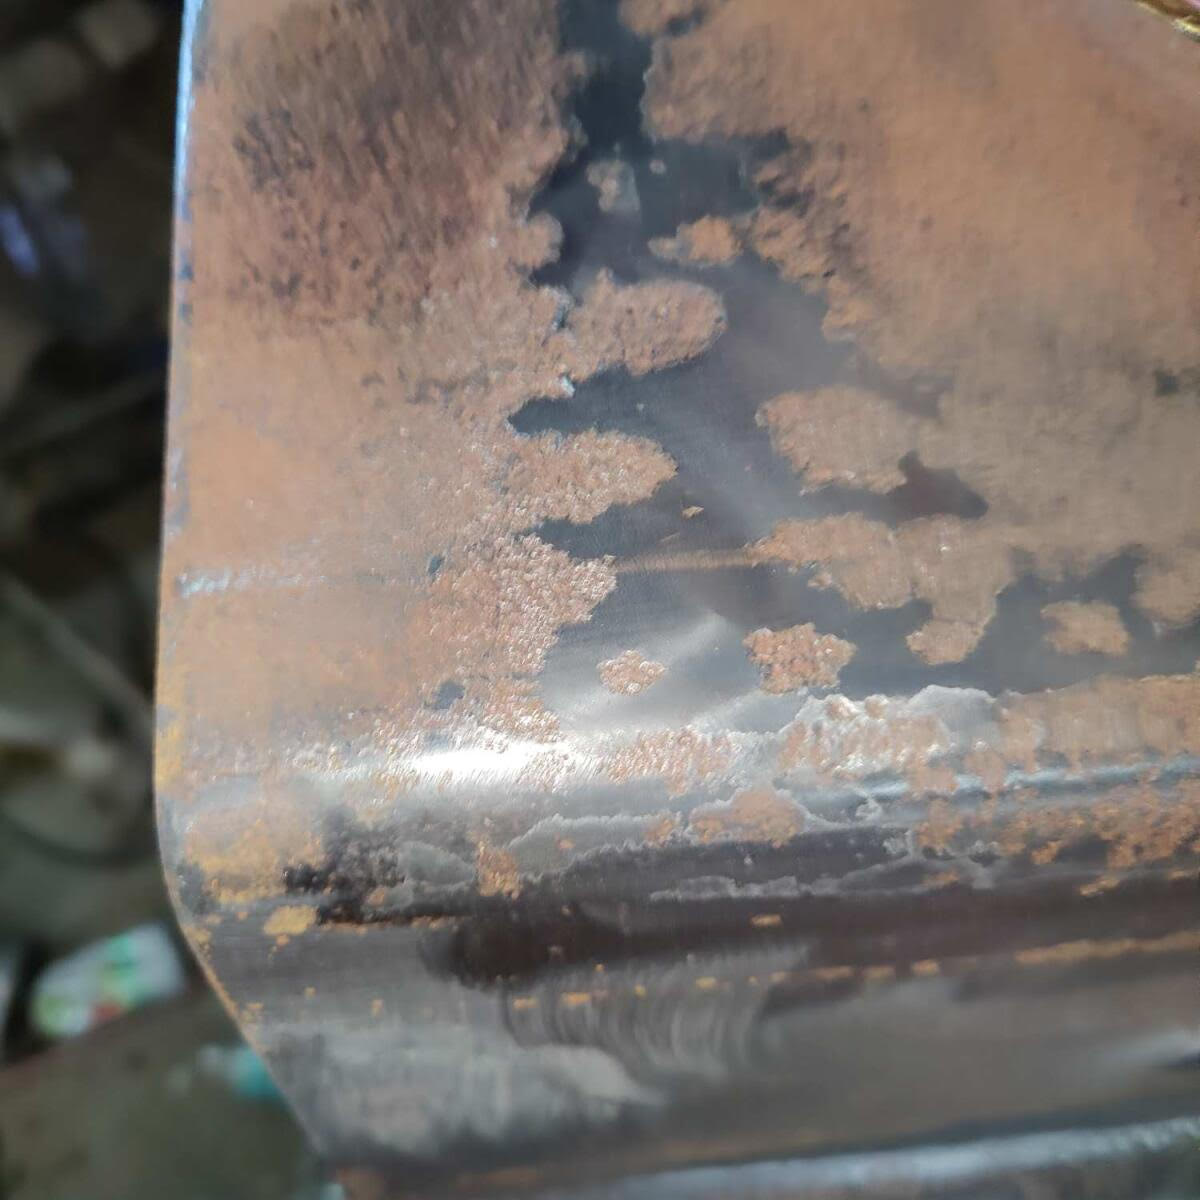 Extremely pitted rust on Baby Bear, need advice on removal technique. This one is challenging.